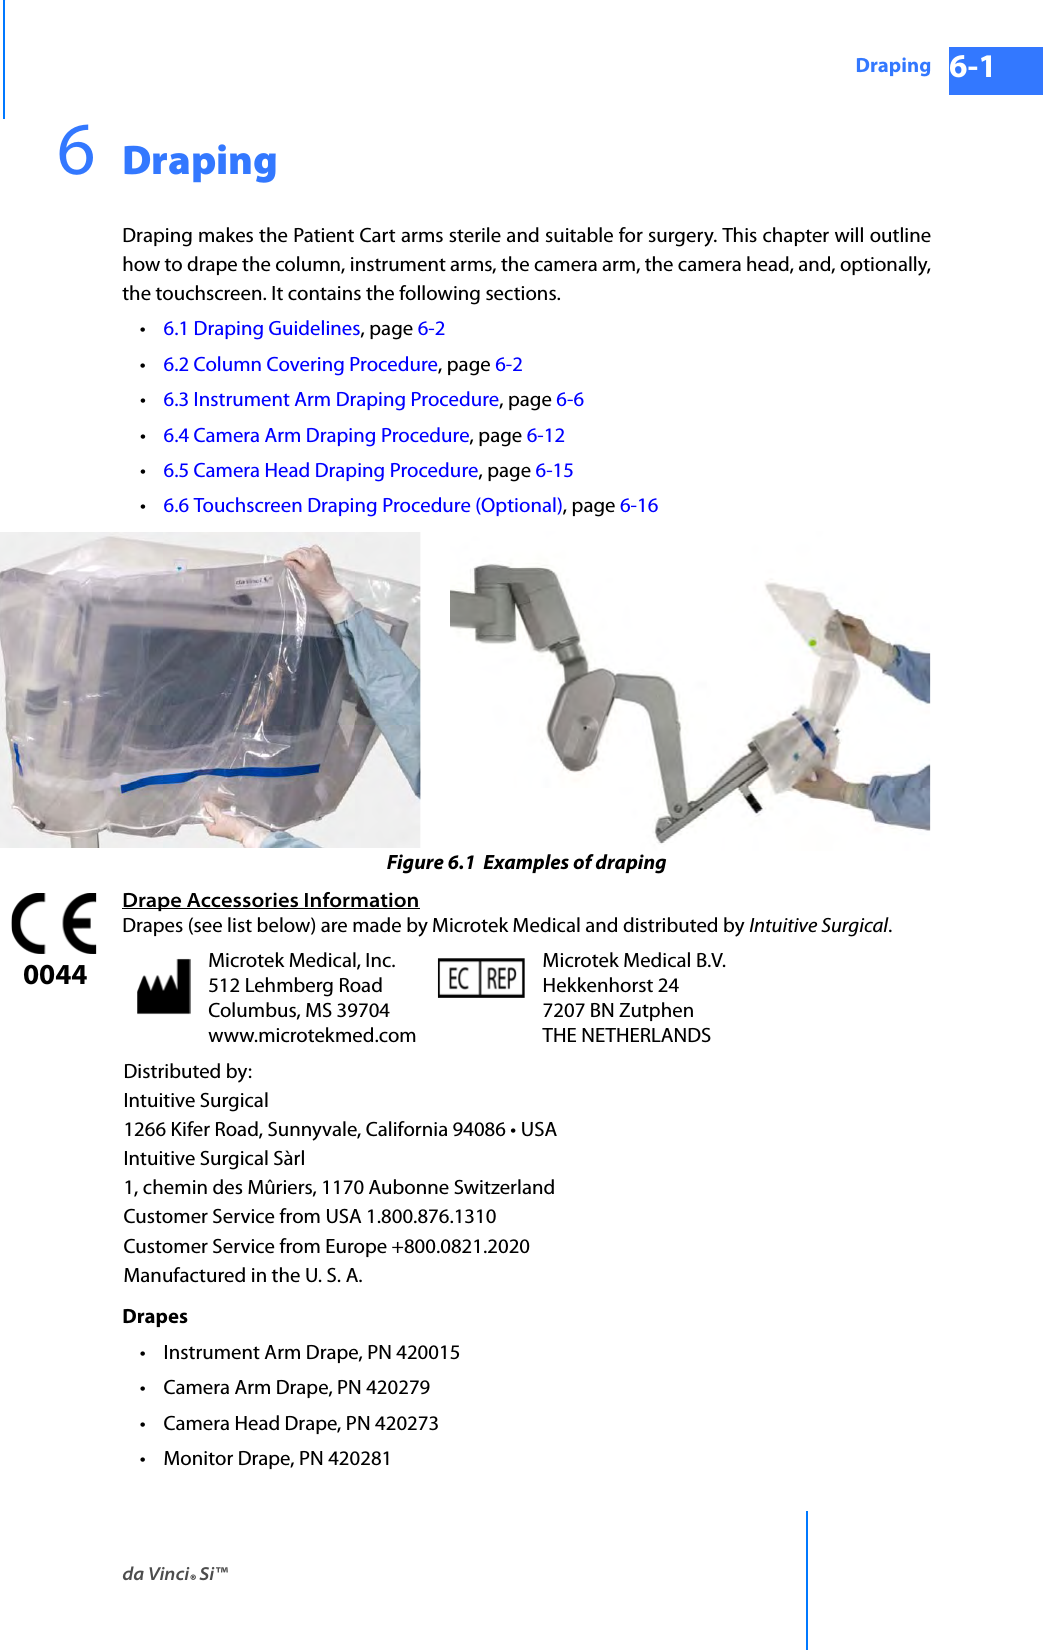 da Vinci® Si™Draping 6-1DRAFT/PRE-RELEASE/CONFIDENTIAL 10/9/146DrapingDraping makes the Patient Cart arms sterile and suitable for surgery. This chapter will outline how to drape the column, instrument arms, the camera arm, the camera head, and, optionally, the touchscreen. It contains the following sections.•6.1 Draping Guidelines, page 6-2•6.2 Column Covering Procedure, page 6-2•6.3 Instrument Arm Draping Procedure, page 6-6•6.4 Camera Arm Draping Procedure, page 6-12•6.5 Camera Head Draping Procedure, page 6-15•6.6 Touchscreen Draping Procedure (Optional), page 6-16 Figure 6.1  Examples of drapingDrape Accessories InformationDrapes (see list below) are made by Microtek Medical and distributed by Intuitive Surgical.Drapes• Instrument Arm Drape, PN 420015• Camera Arm Drape, PN 420279 • Camera Head Drape, PN 420273 • Monitor Drape, PN 420281 Microtek Medical, Inc. 512 Lehmberg Road Columbus, MS 39704 www.microtekmed.comMicrotek Medical B.V. Hekkenhorst 24 7207 BN Zutphen THE NETHERLANDSDistributed by:Intuitive Surgical1266 Kifer Road, Sunnyvale, California 94086 • USAIntuitive Surgical Sàrl1, chemin des Mûriers, 1170 Aubonne SwitzerlandCustomer Service from USA 1.800.876.1310Customer Service from Europe +800.0821.2020Manufactured in the U. S. A.0044